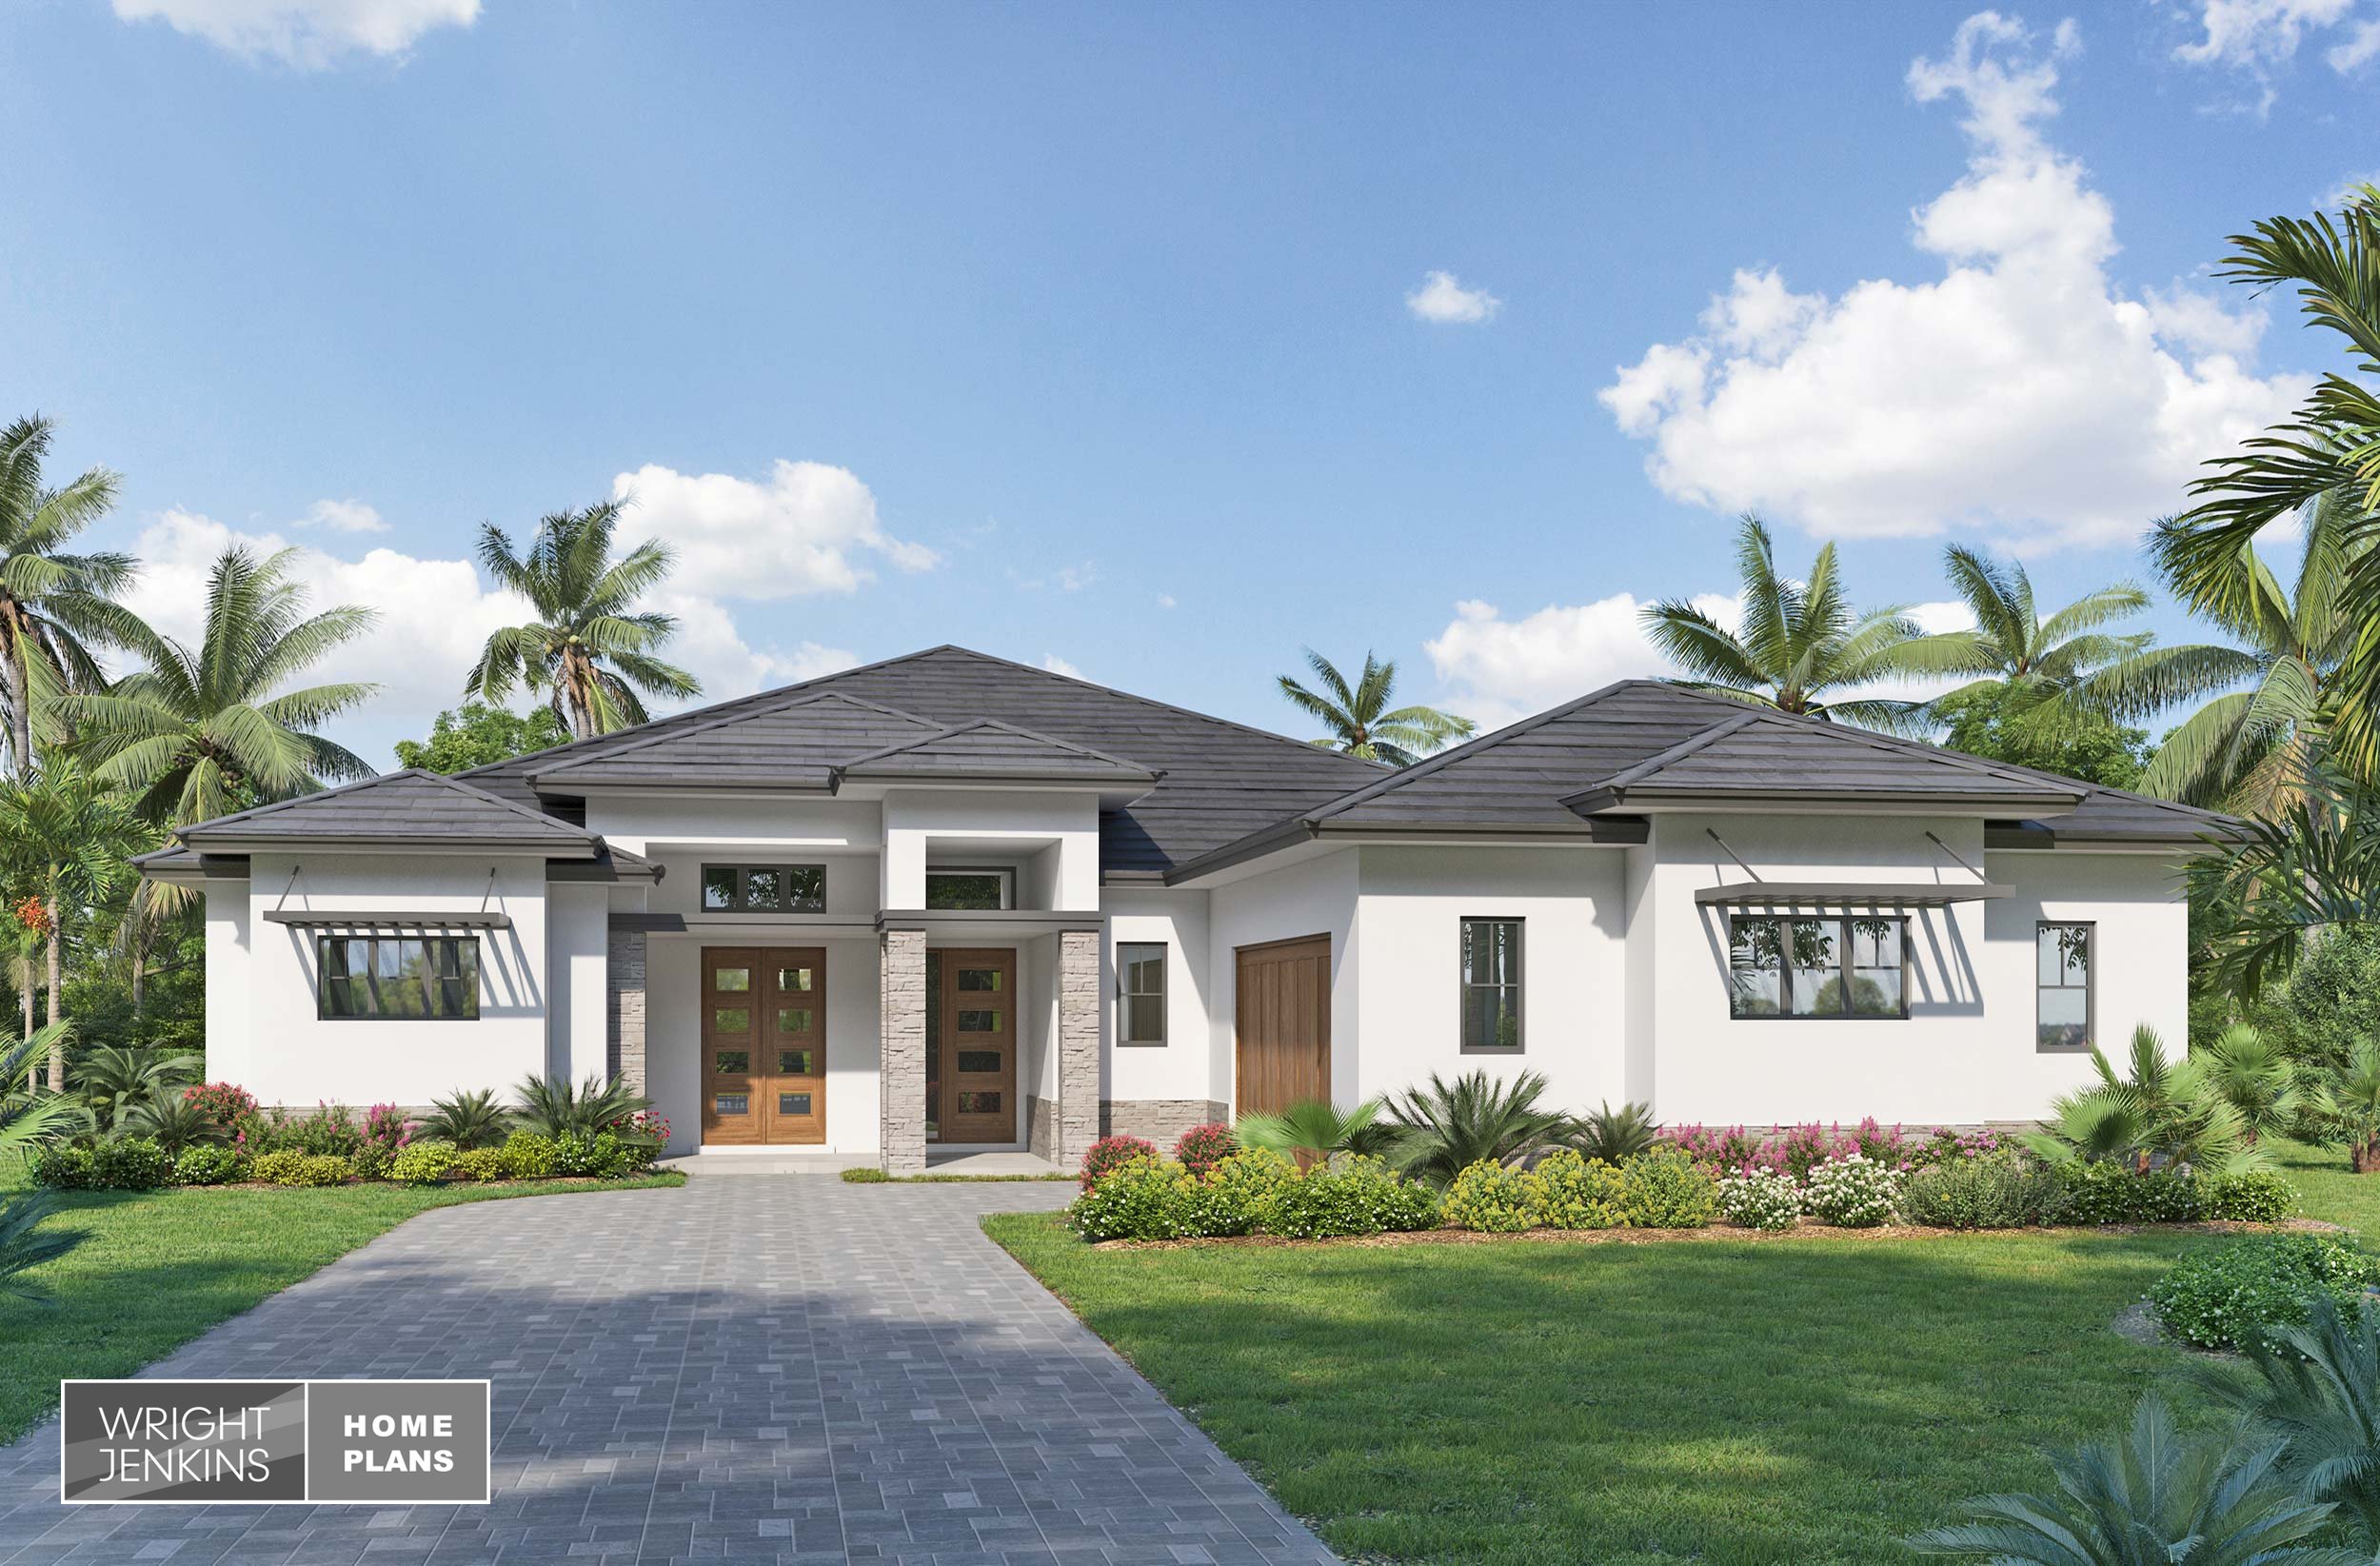    Featured Plan: Triana Home Plan #606   